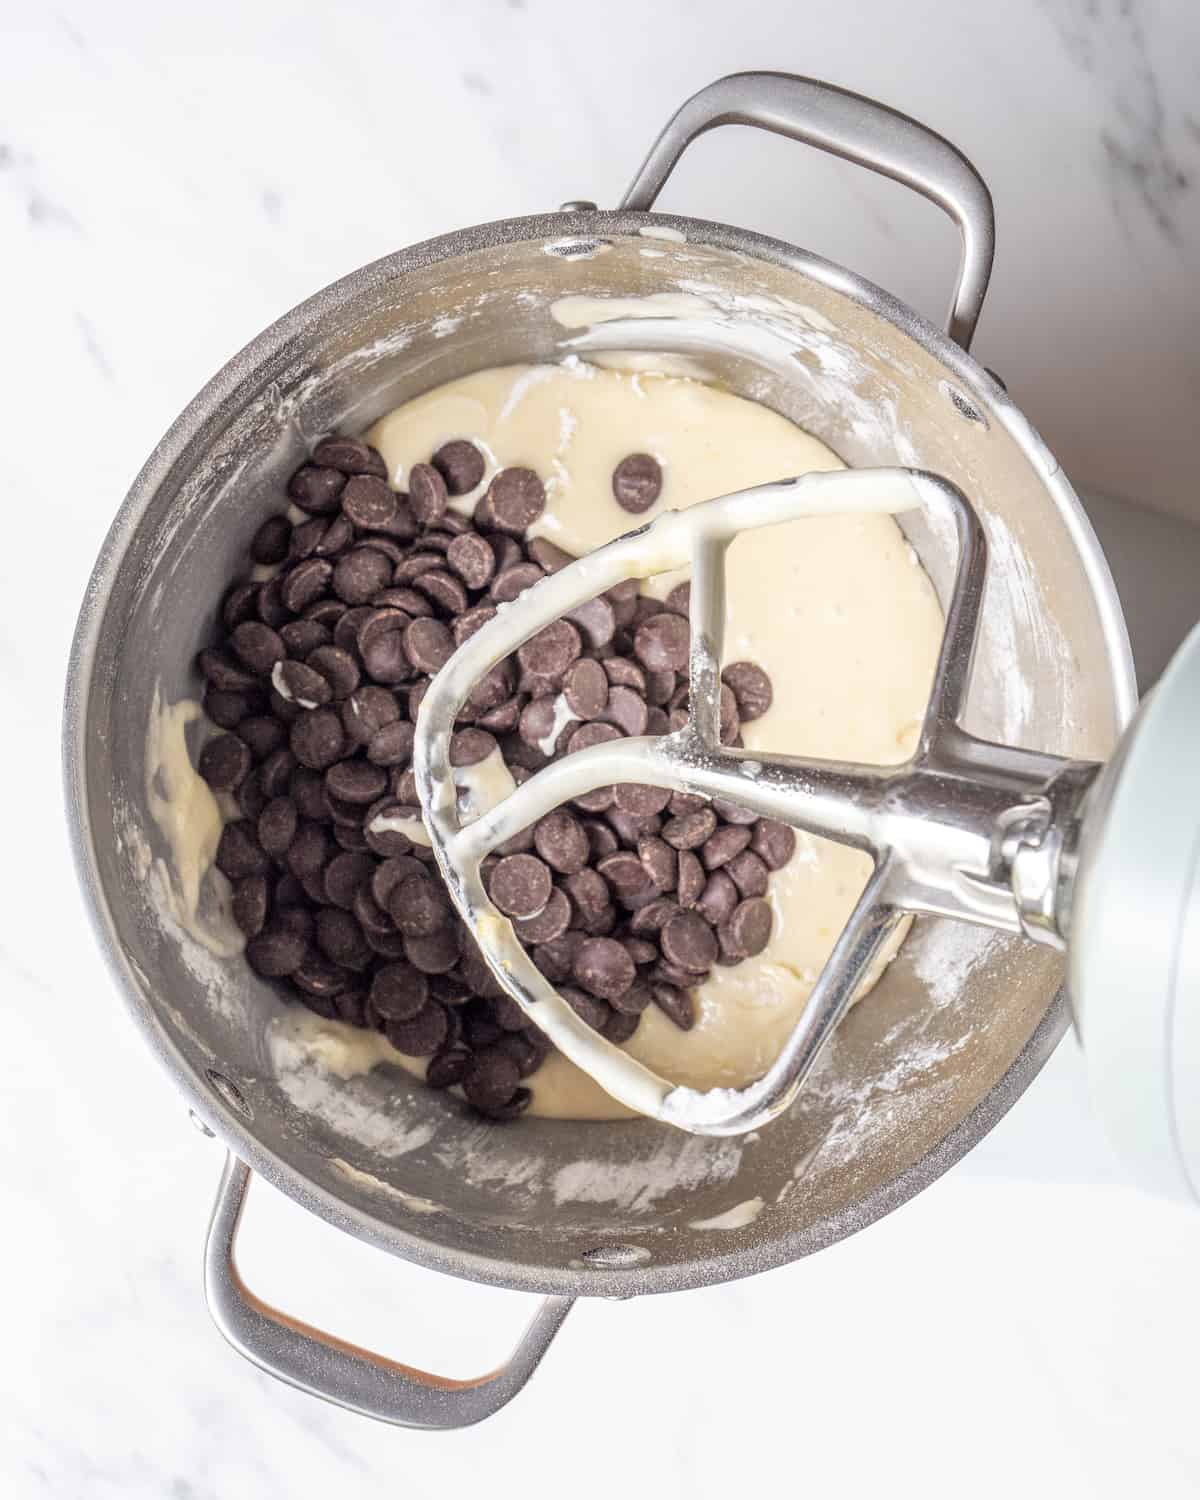 Chocolate chips has been added to all the ingredients used up to this point in the stand mixer.  